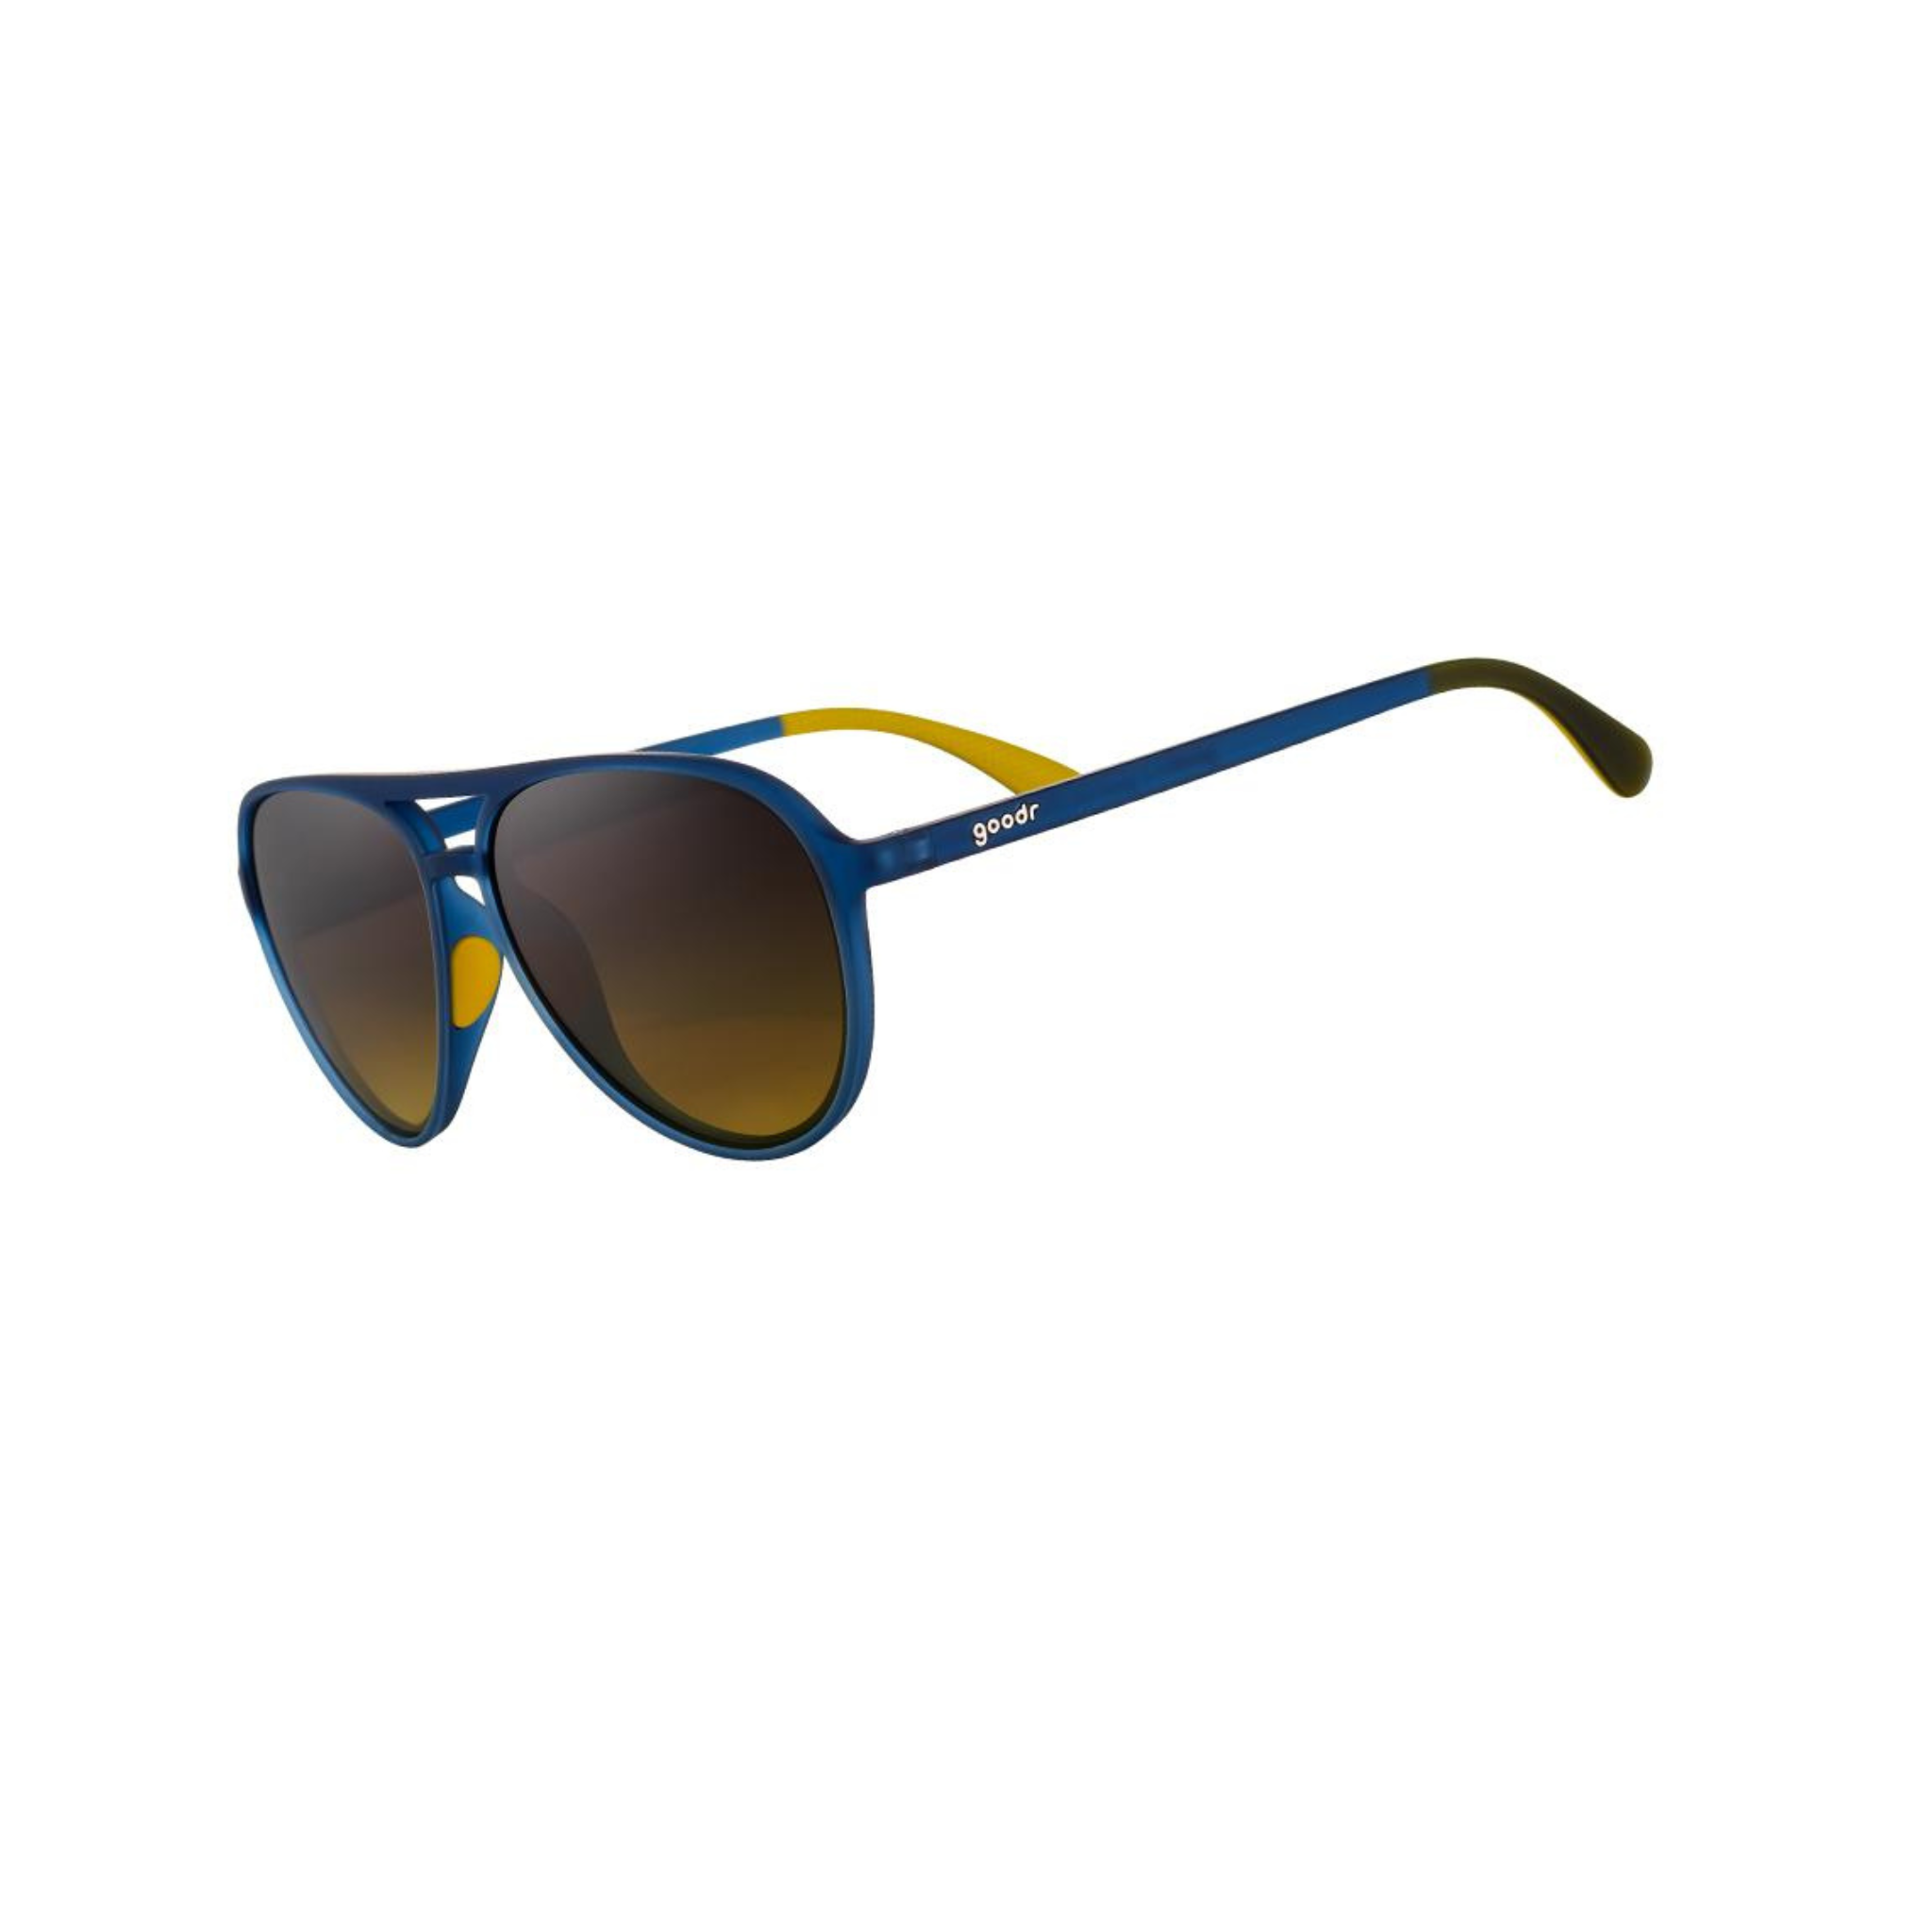 Goodr Mach G Amelia Earhart Ghosted Me Sunglasses